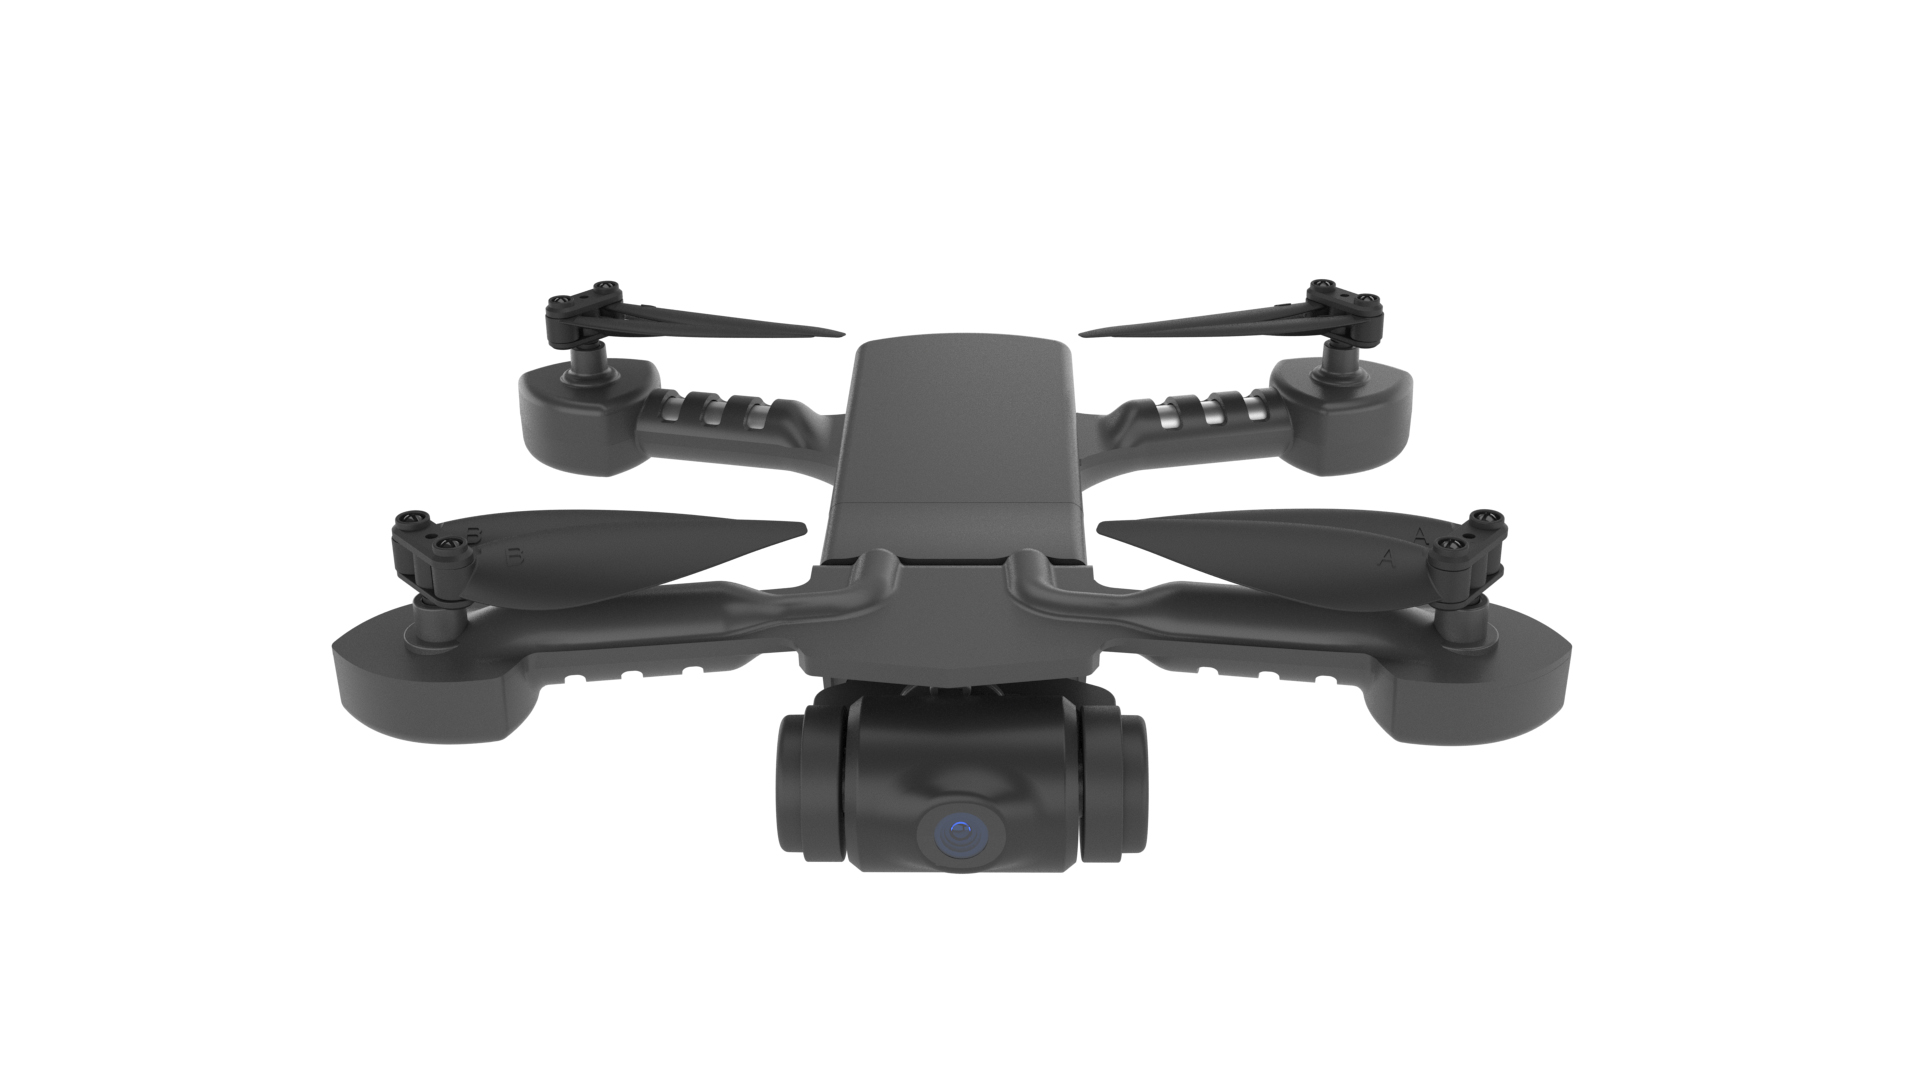 Micro Drone 4.0 passes $1 million in funding with ringing endorsement